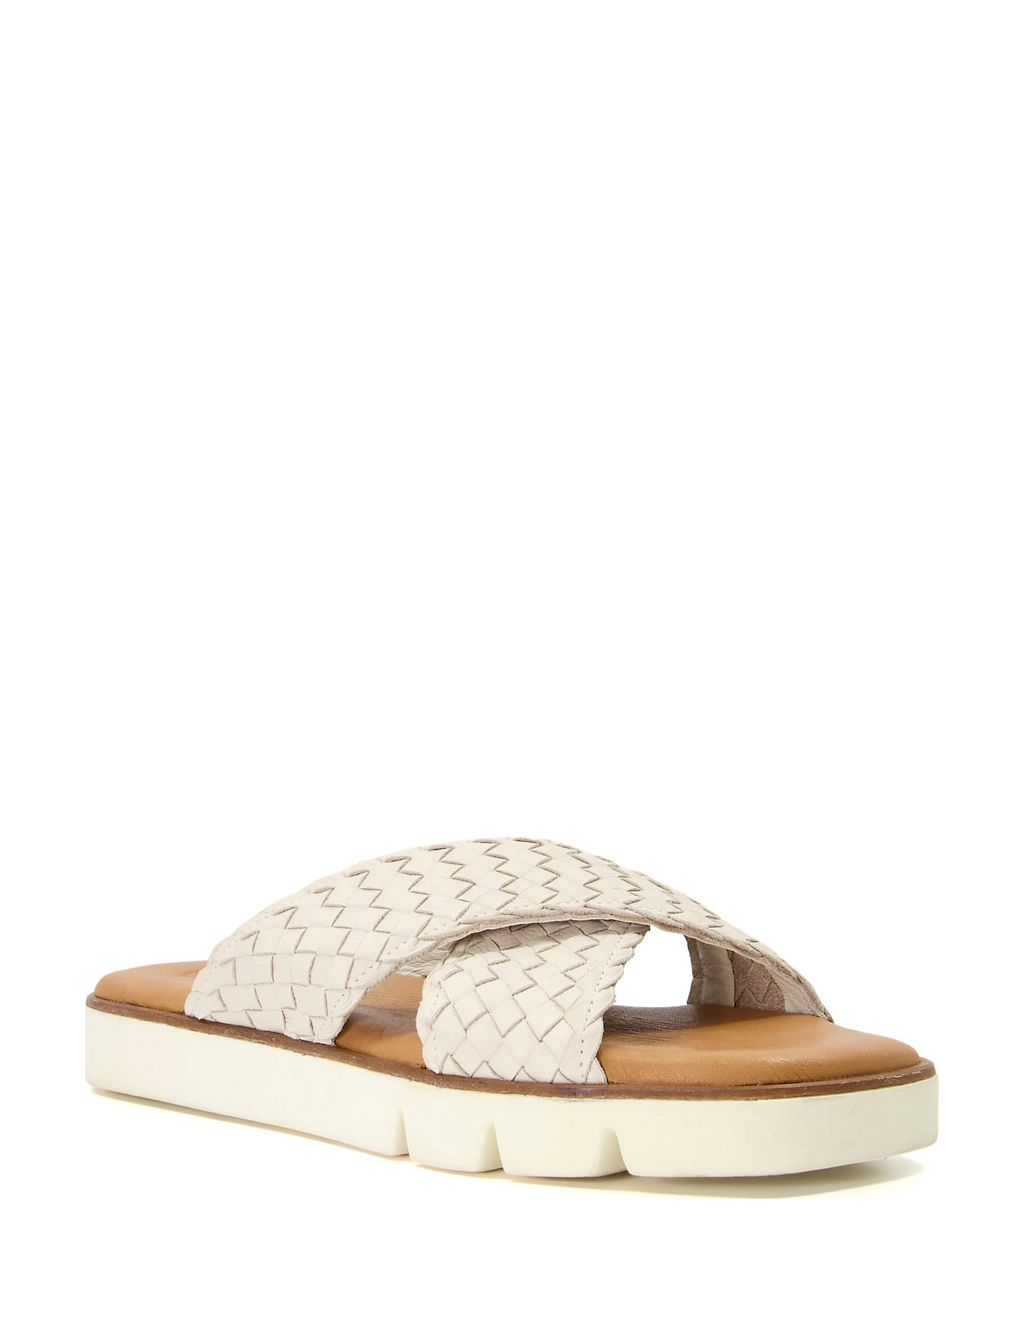 Leather Woven Crossover Flat Sliders | Dune London | M&S